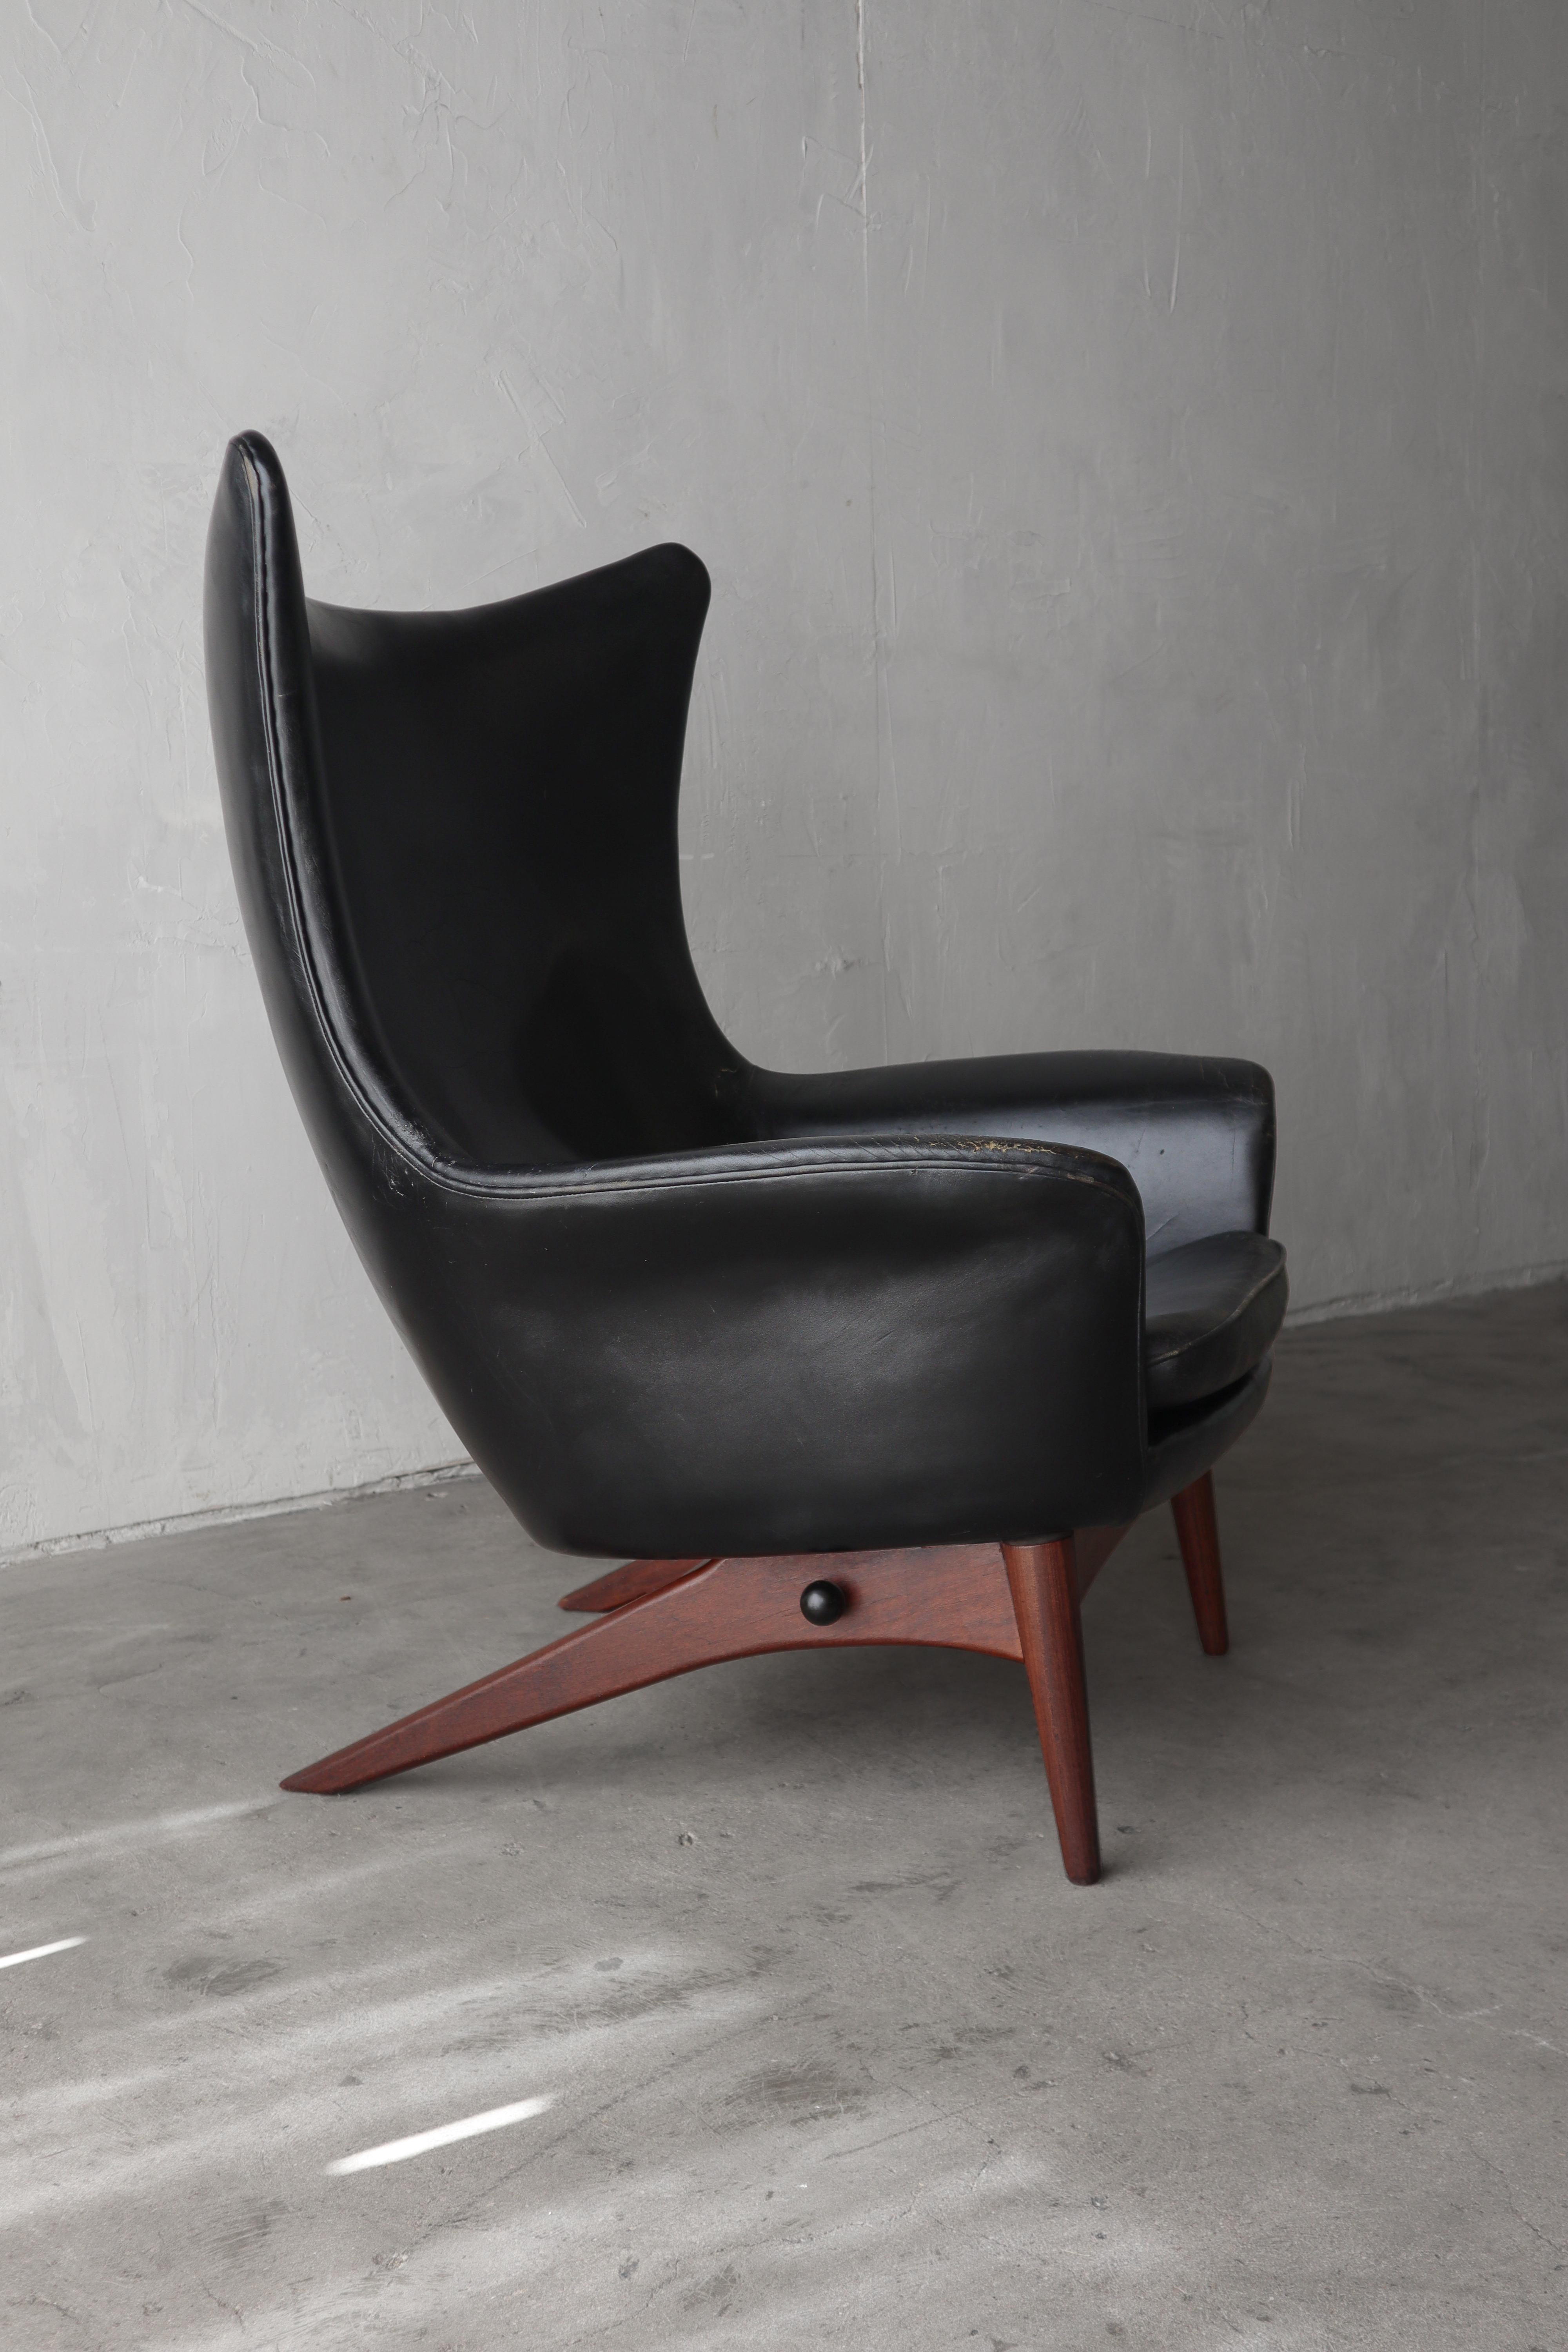 This sculptural reclining lounge chair by Henry Walter Klein is the epitome of Danish design.   

The chair features a beautiful wingback design and multi-position, locking recliner feature for maximum comfort.  The trailing walnut legs add to the